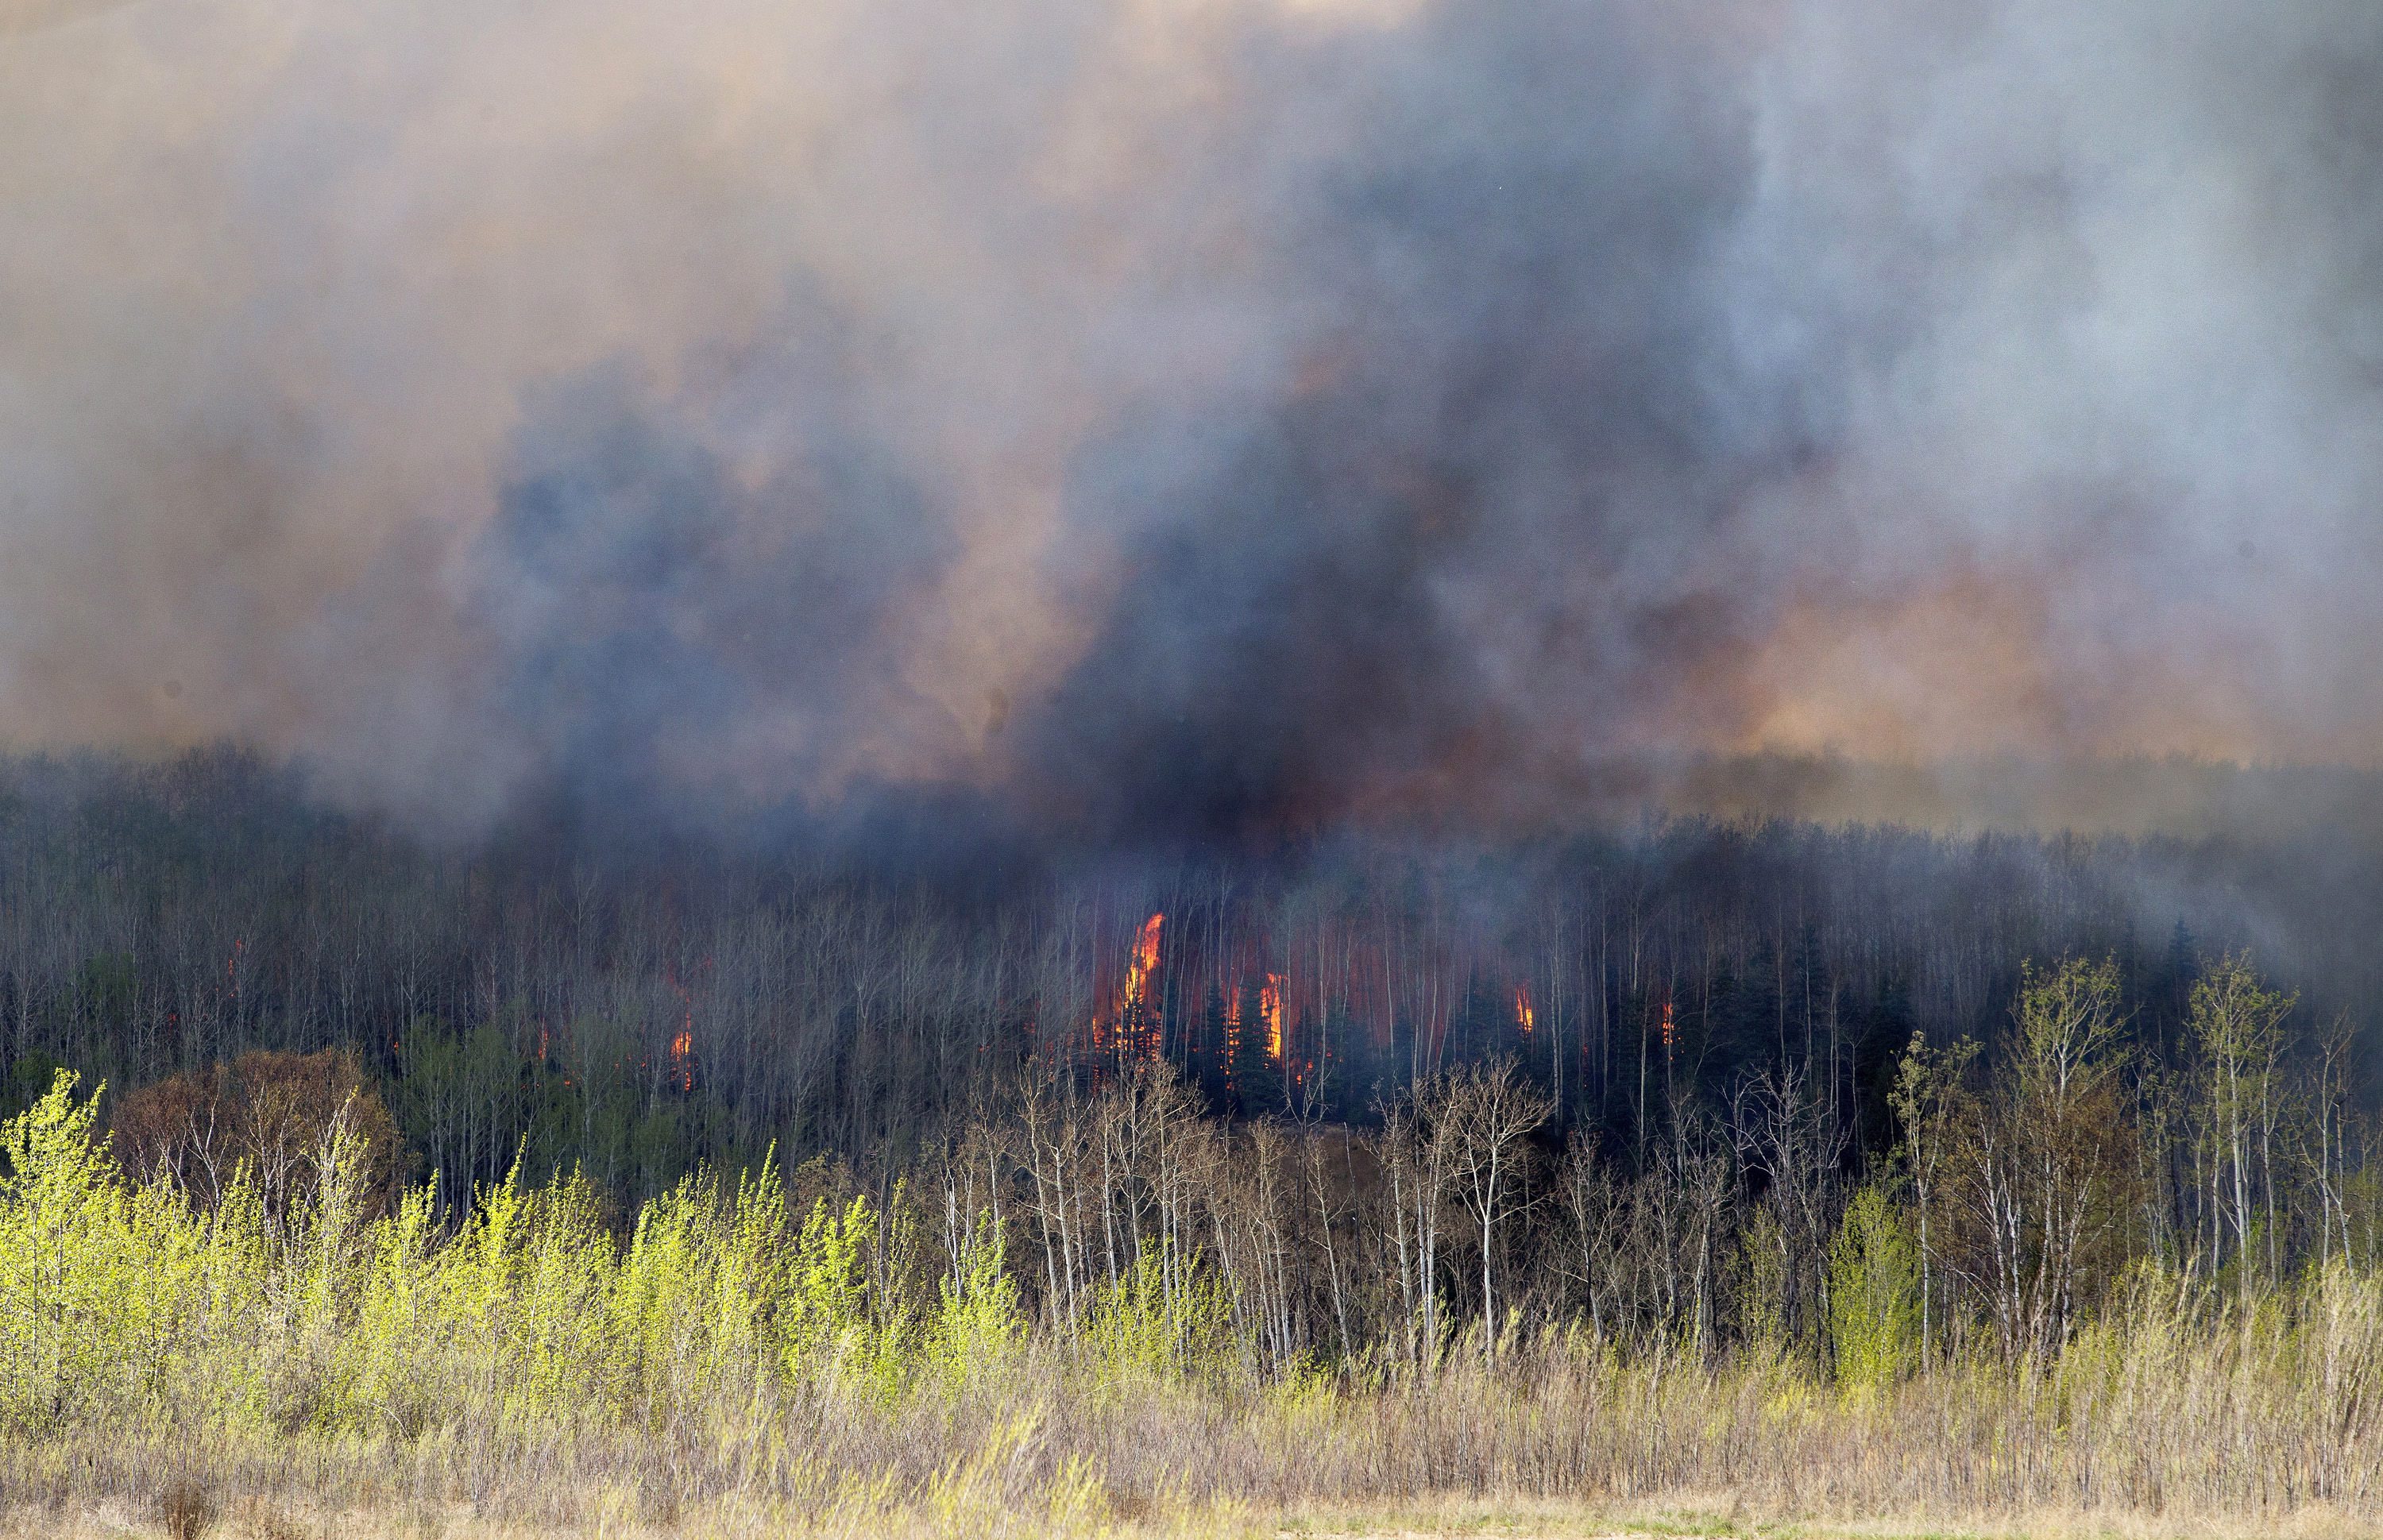 A wildfire rages through Fort McMurray, Alberta, Wednesday, May 4, 2016. The raging wildfire emptied Canada's main oil sands city, destroying entire neighborhoods of Fort McMurray, where officials warned Wednesday that all efforts to suppress the fire have failed. (Jason Franson /The Canadian Press via AP) MANDATORY CREDIT